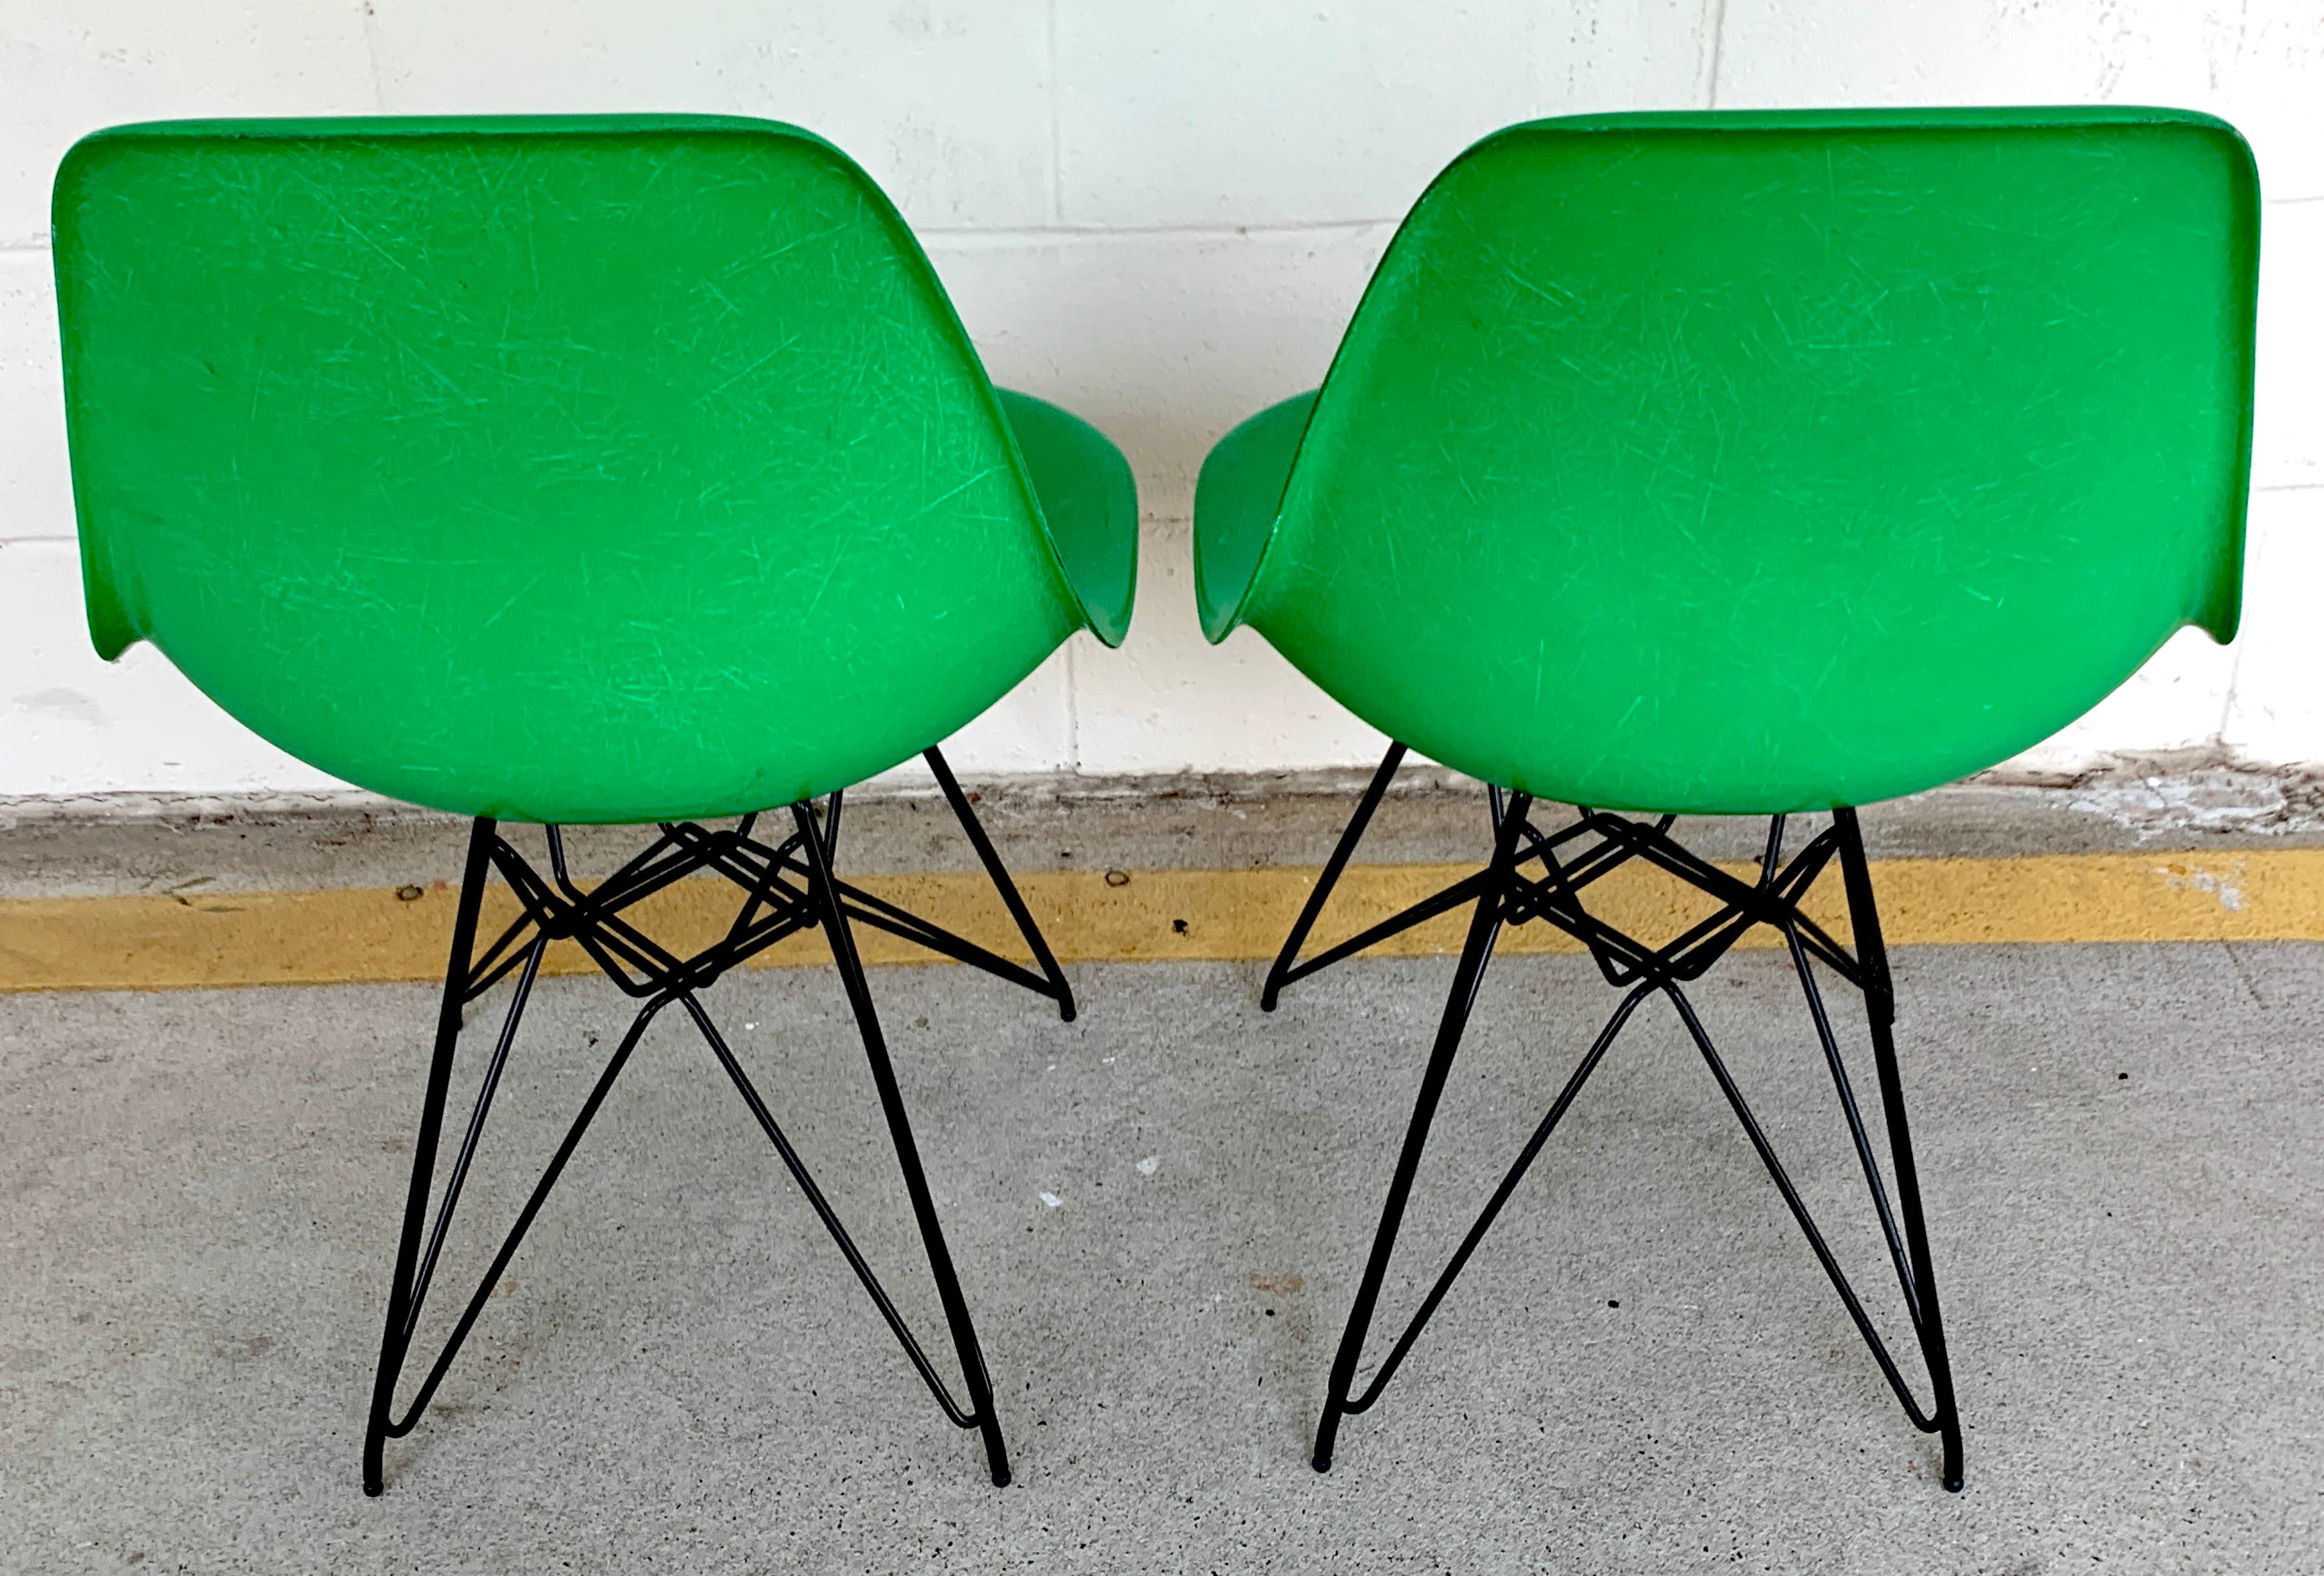 20th Century Pair of Herman Miller Eames Eiffel Tower Green Shell Chairs